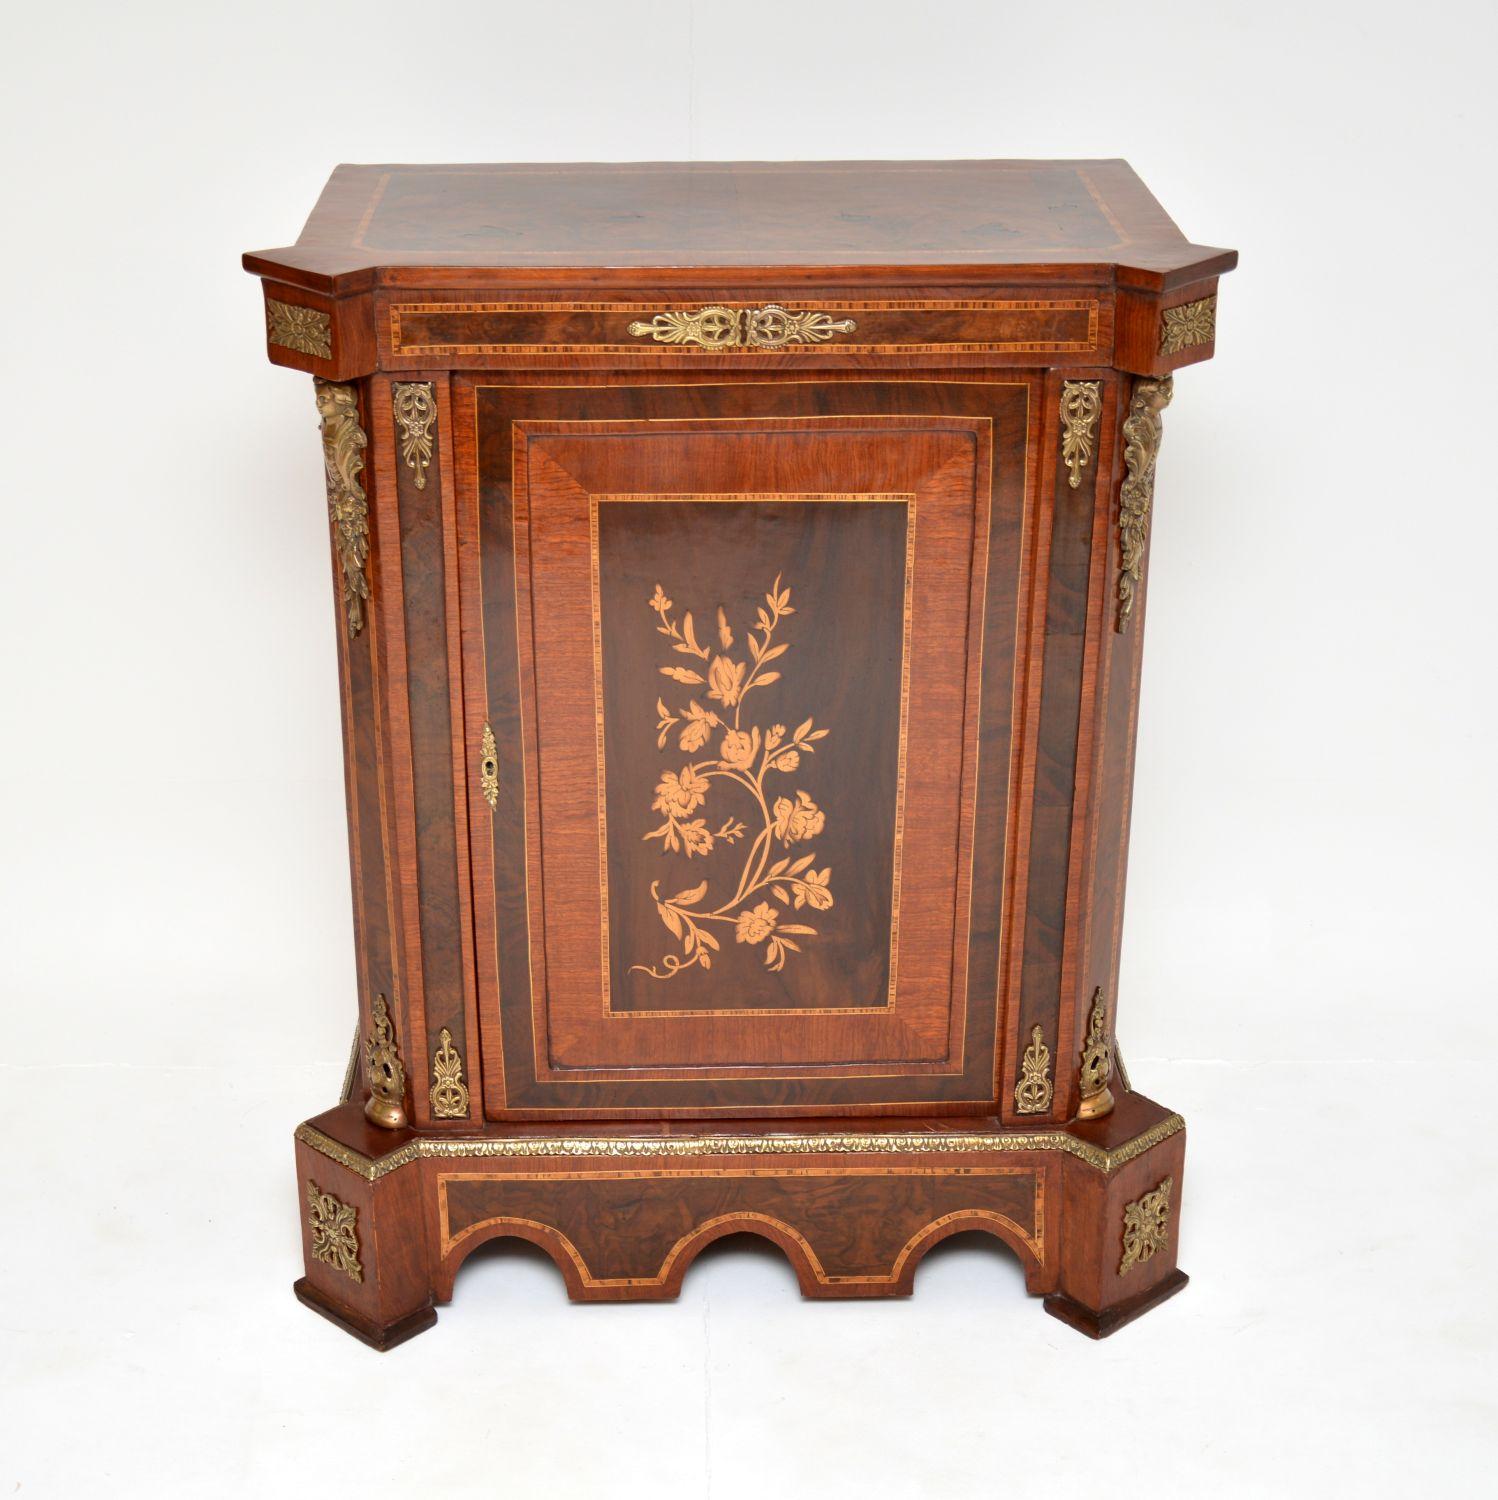 A beautiful and impressive antique cabinet. I would say it’s French and dates from around the 1930-50’s period.

It has gorgeous inlaid floral designs and nice ormolu mounts throughout. It has an impressive shape and is of lovely proportions.

We